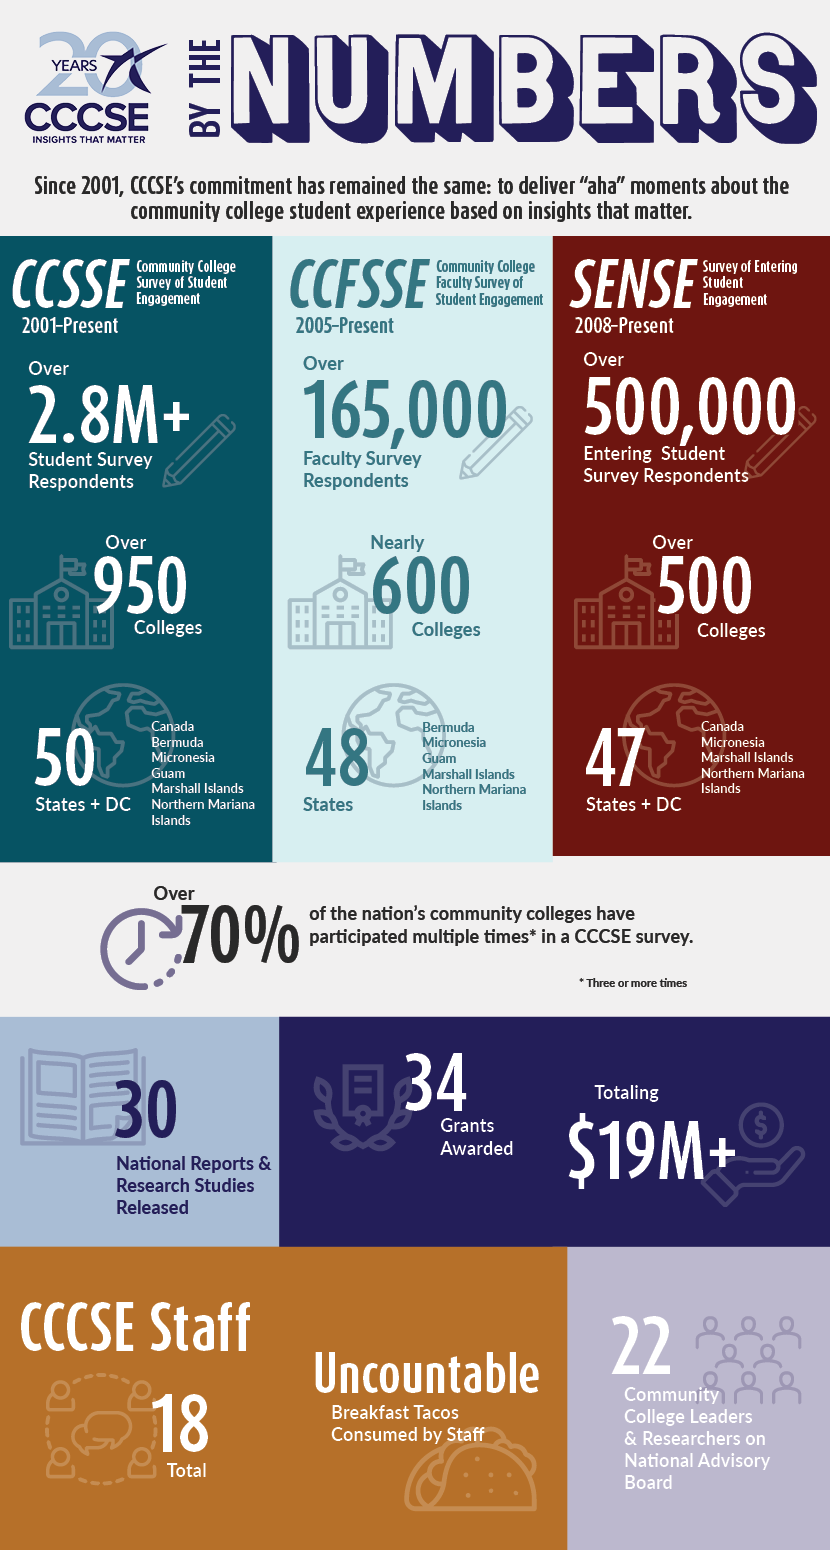 20 Years of CCCSE - By the Numbers - image text follows on the page below